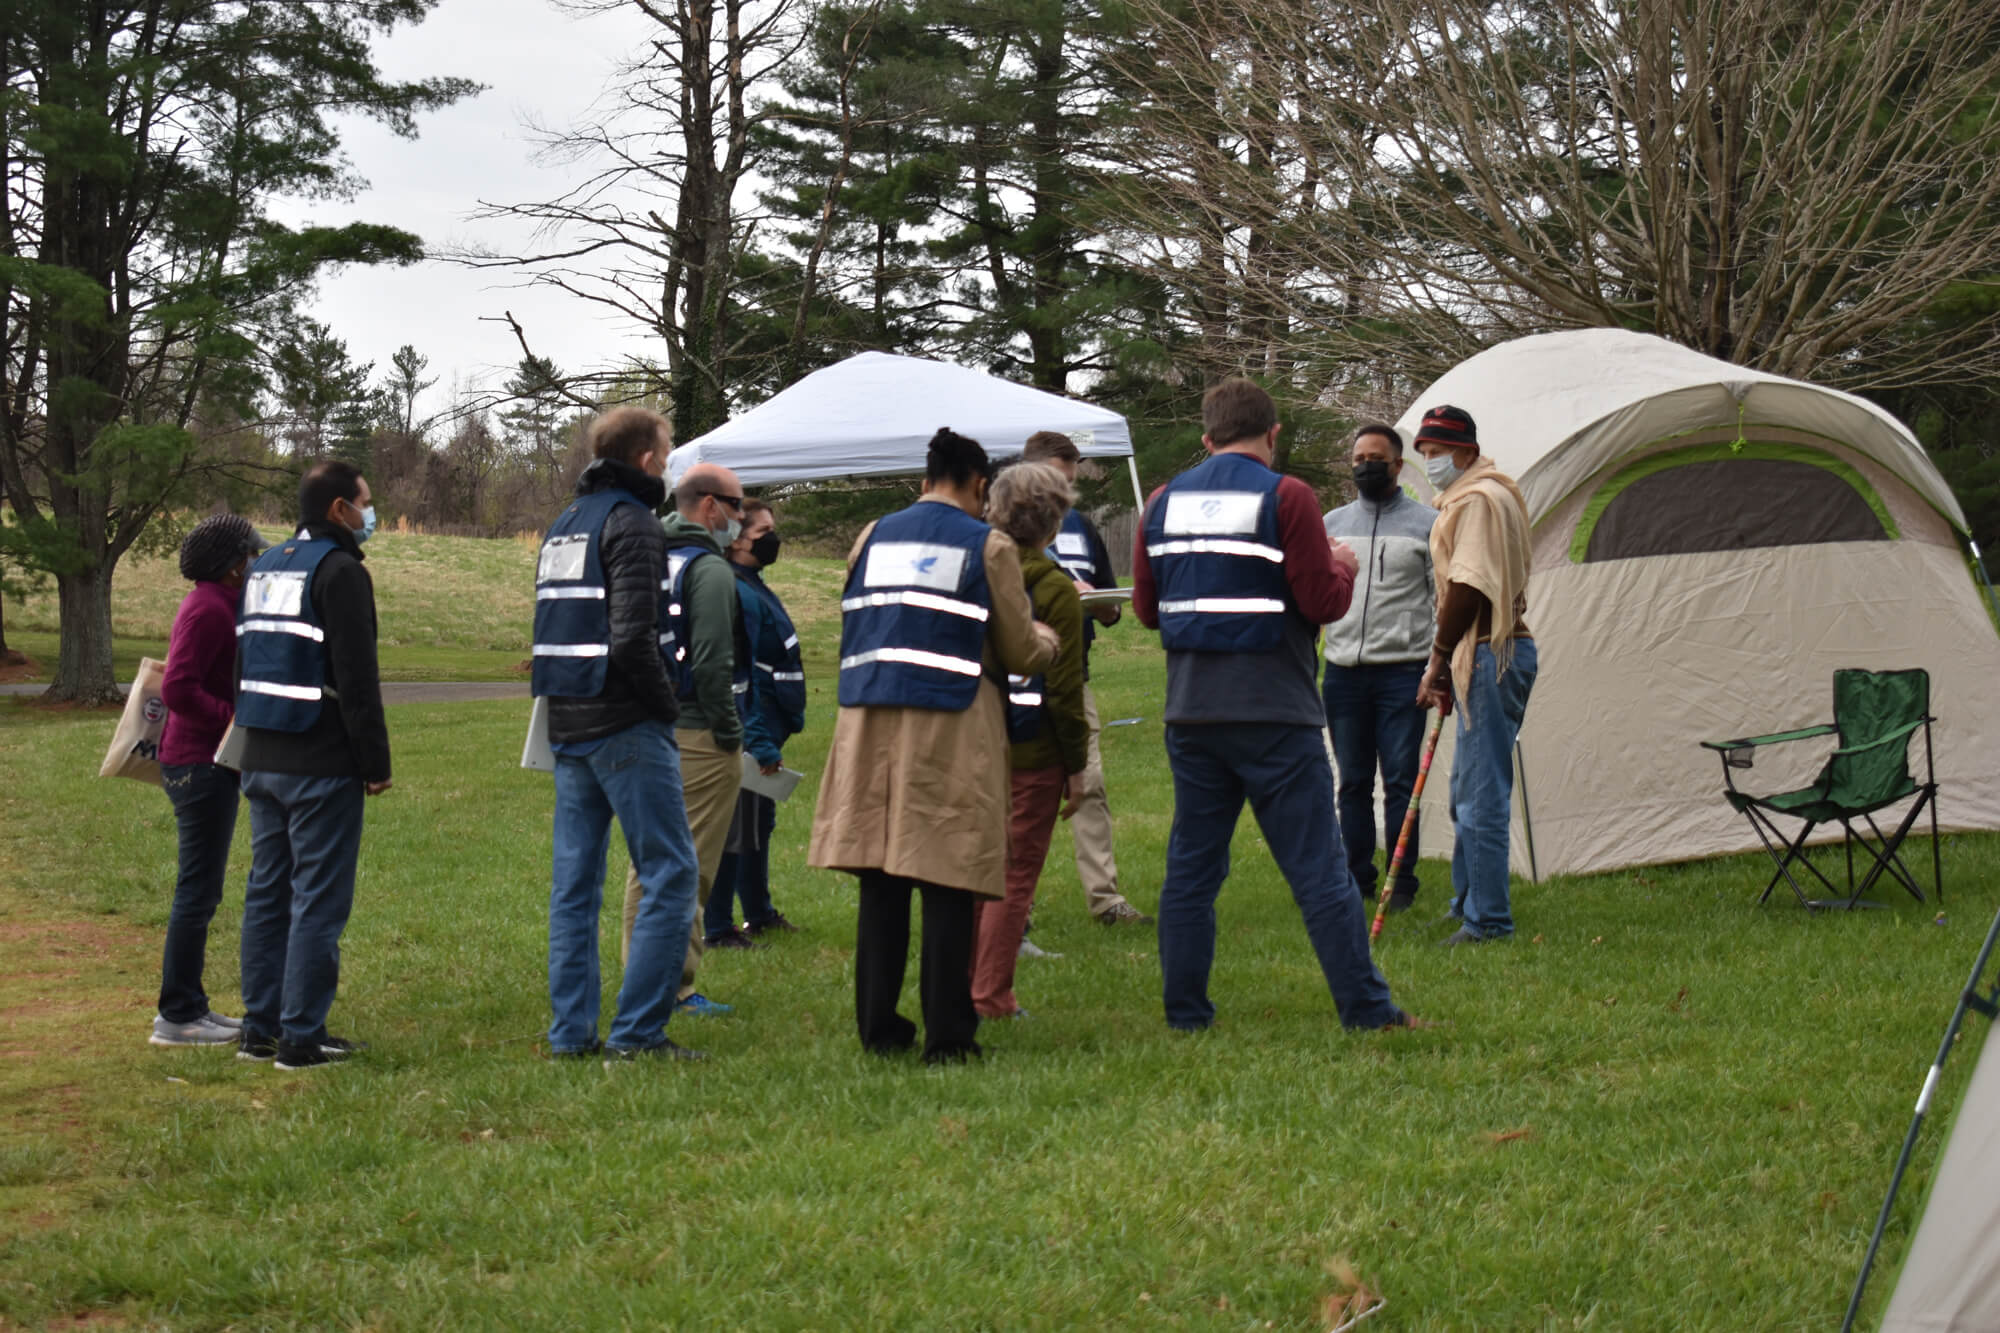 Participants at a disaster-simulation exercise gather information from “survivors” at what remains of their coastal “village,” which according to the scenario provided to participants, had been mostly destroyed a few days earlier by an earthquake and tsunami. The simulation was conducted at a retreat in Airlie, VA.